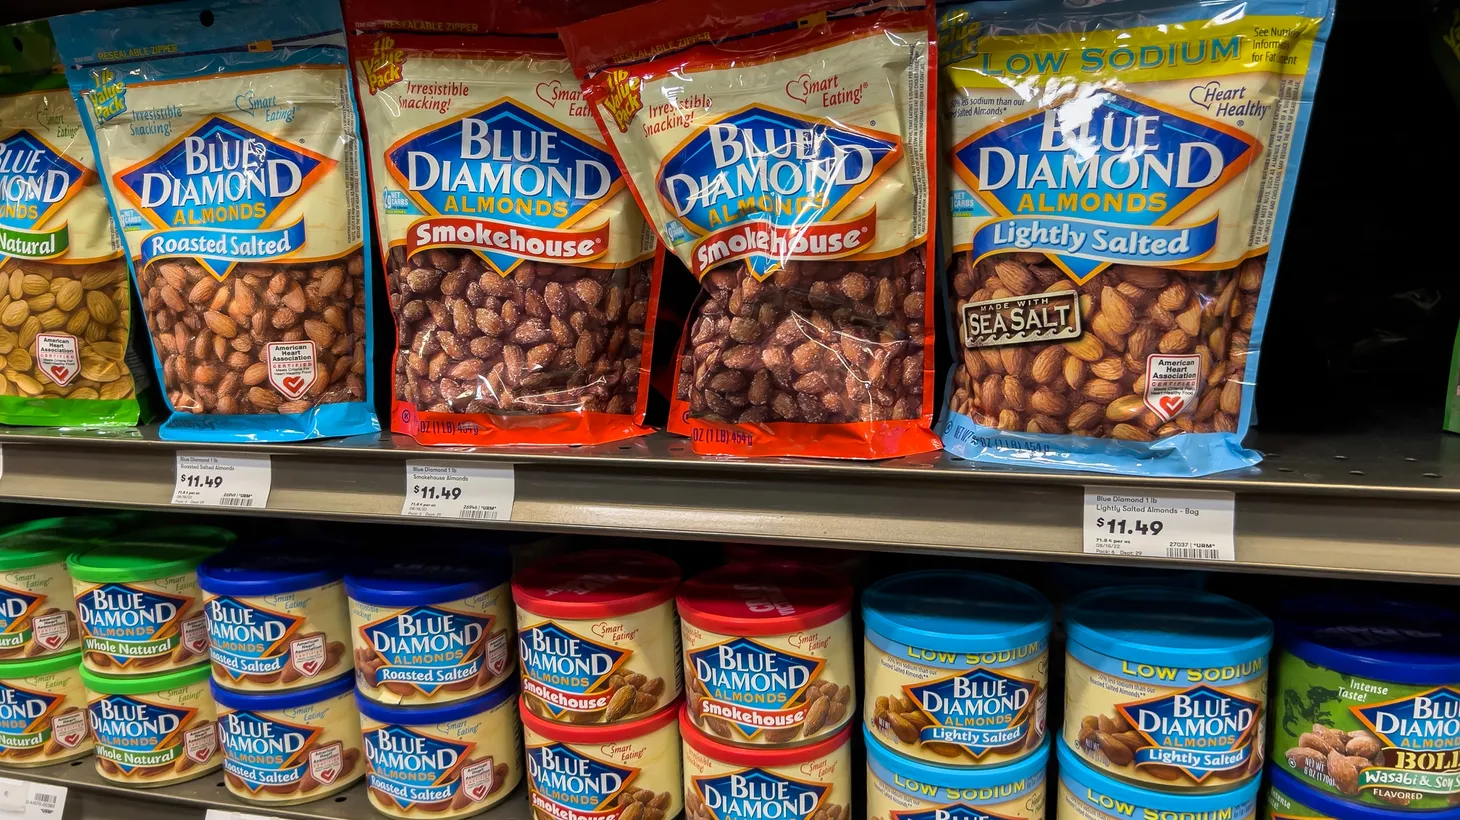 Blue Diamond Almonds was the defendant in one of over 500 false advertising lawsuits filed by attorney Spencer Sheehan.